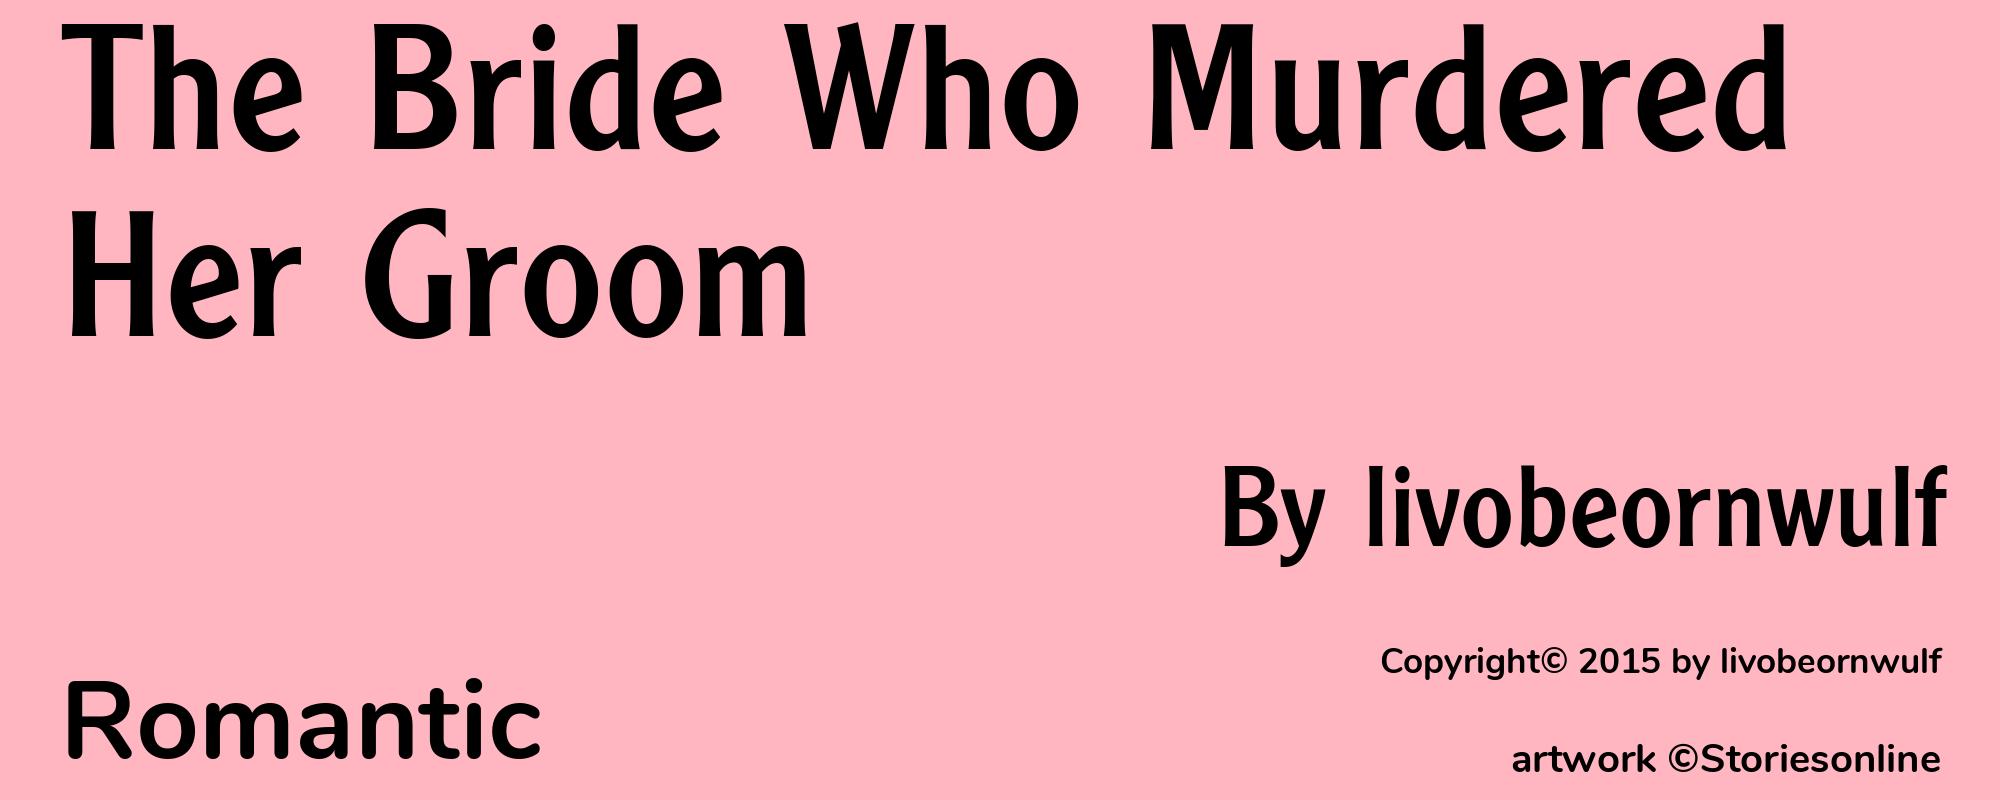 The Bride Who Murdered Her Groom - Cover